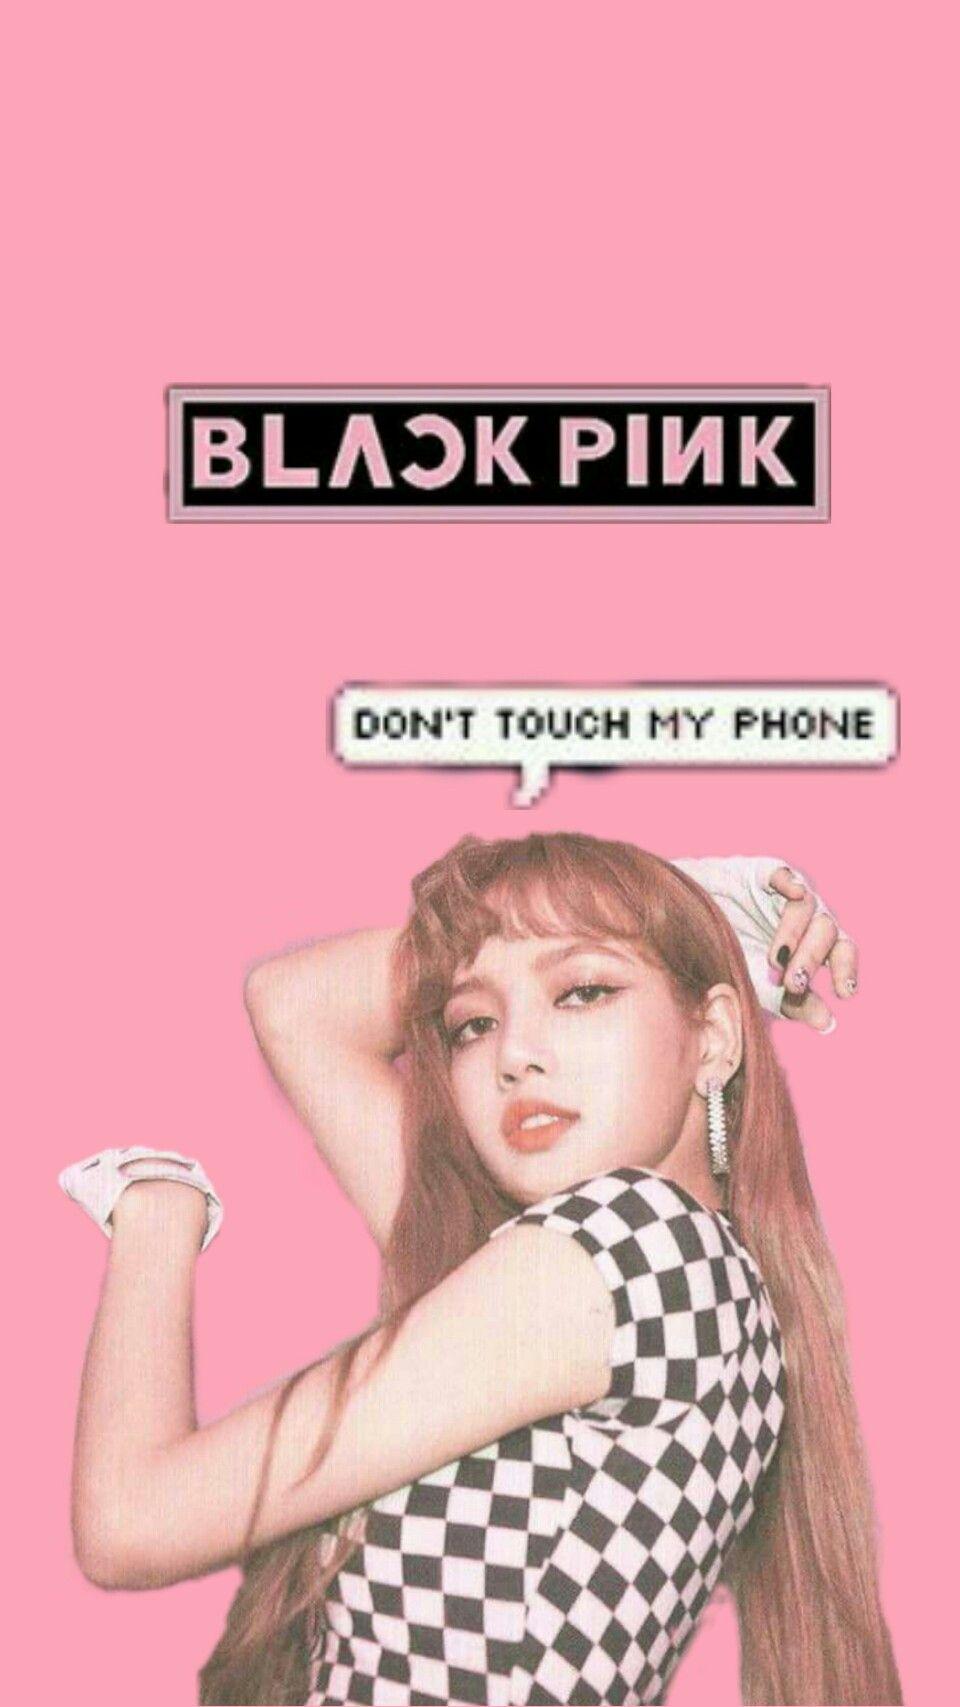 don't touch my phone wallpaper blackpink. Dont touch my phone